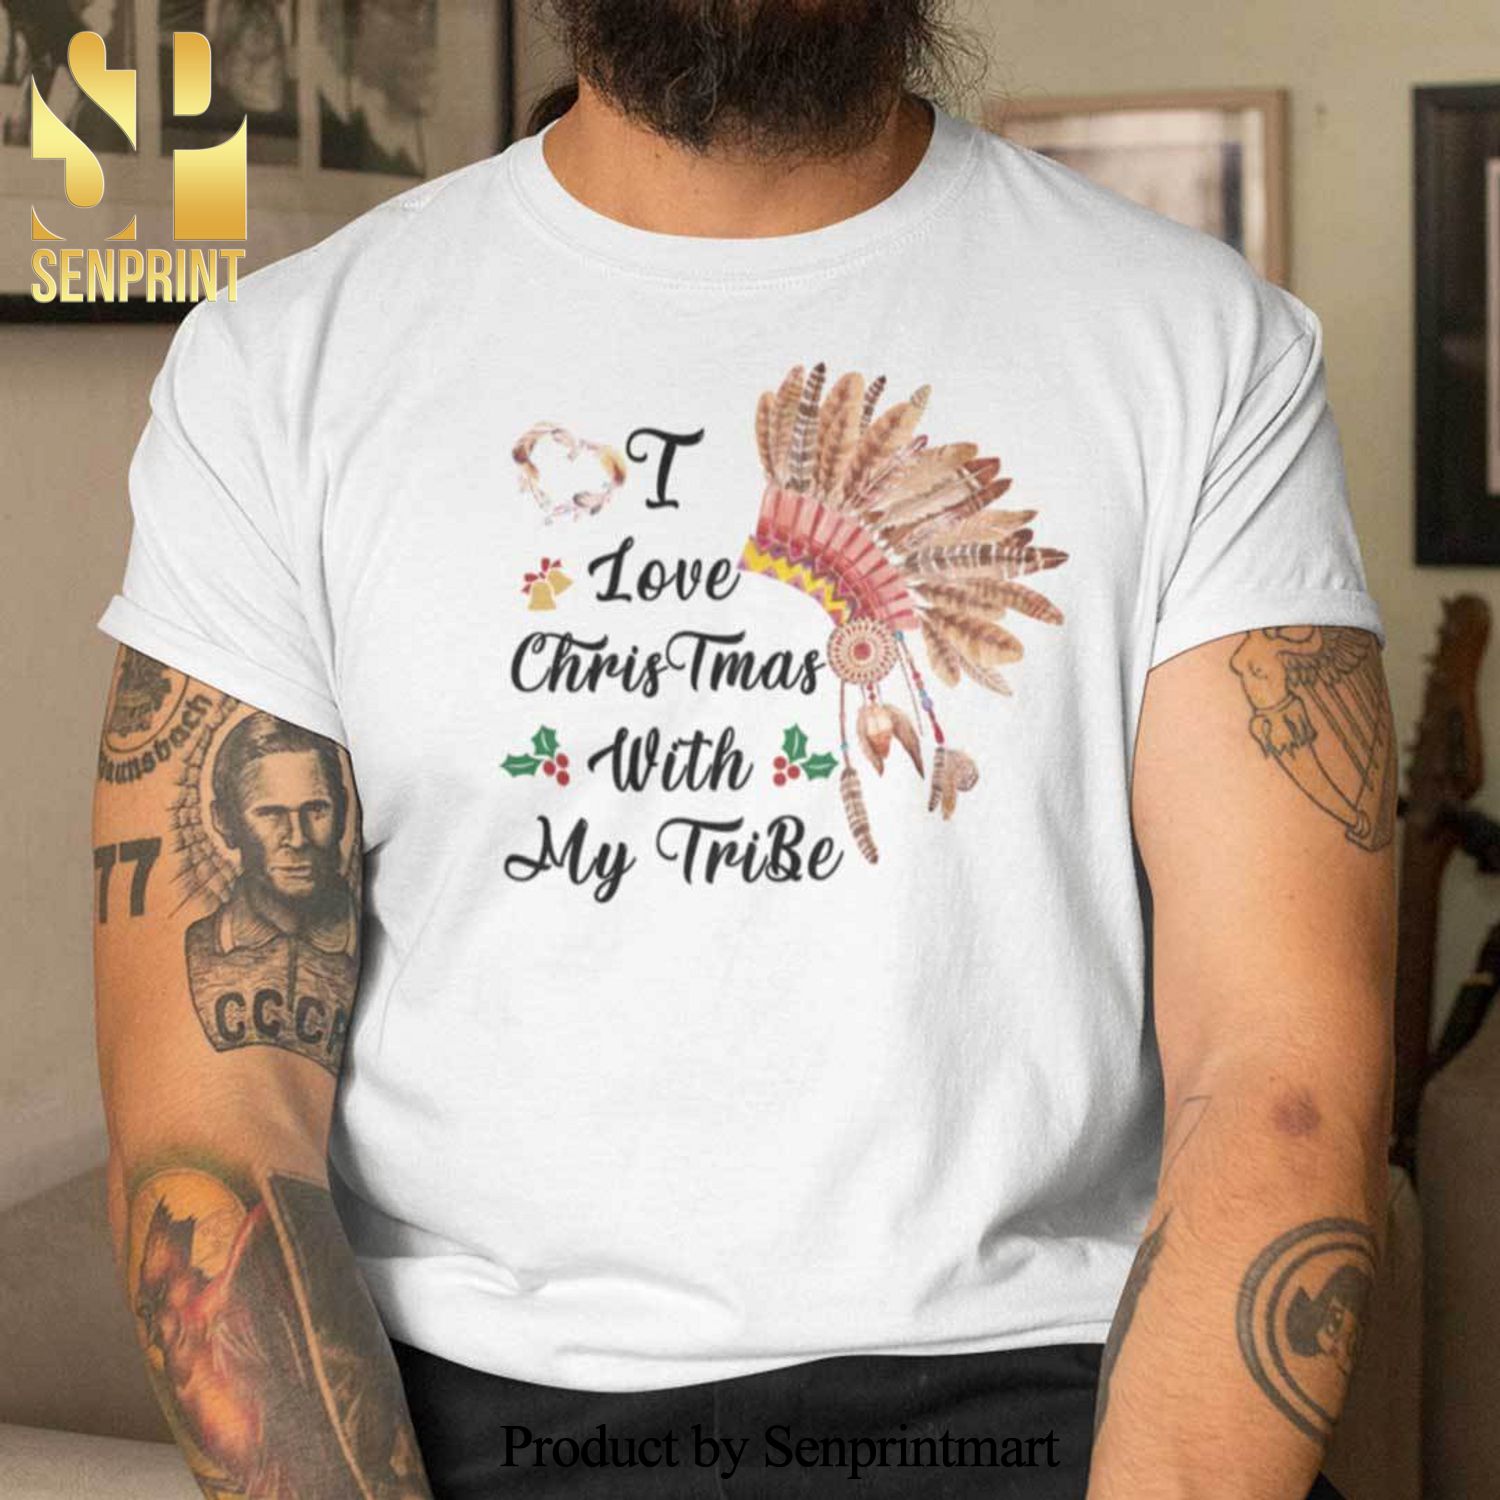 Love Christmas With My Tribe Christmas Gifts Shirt Native American Indian Headdress